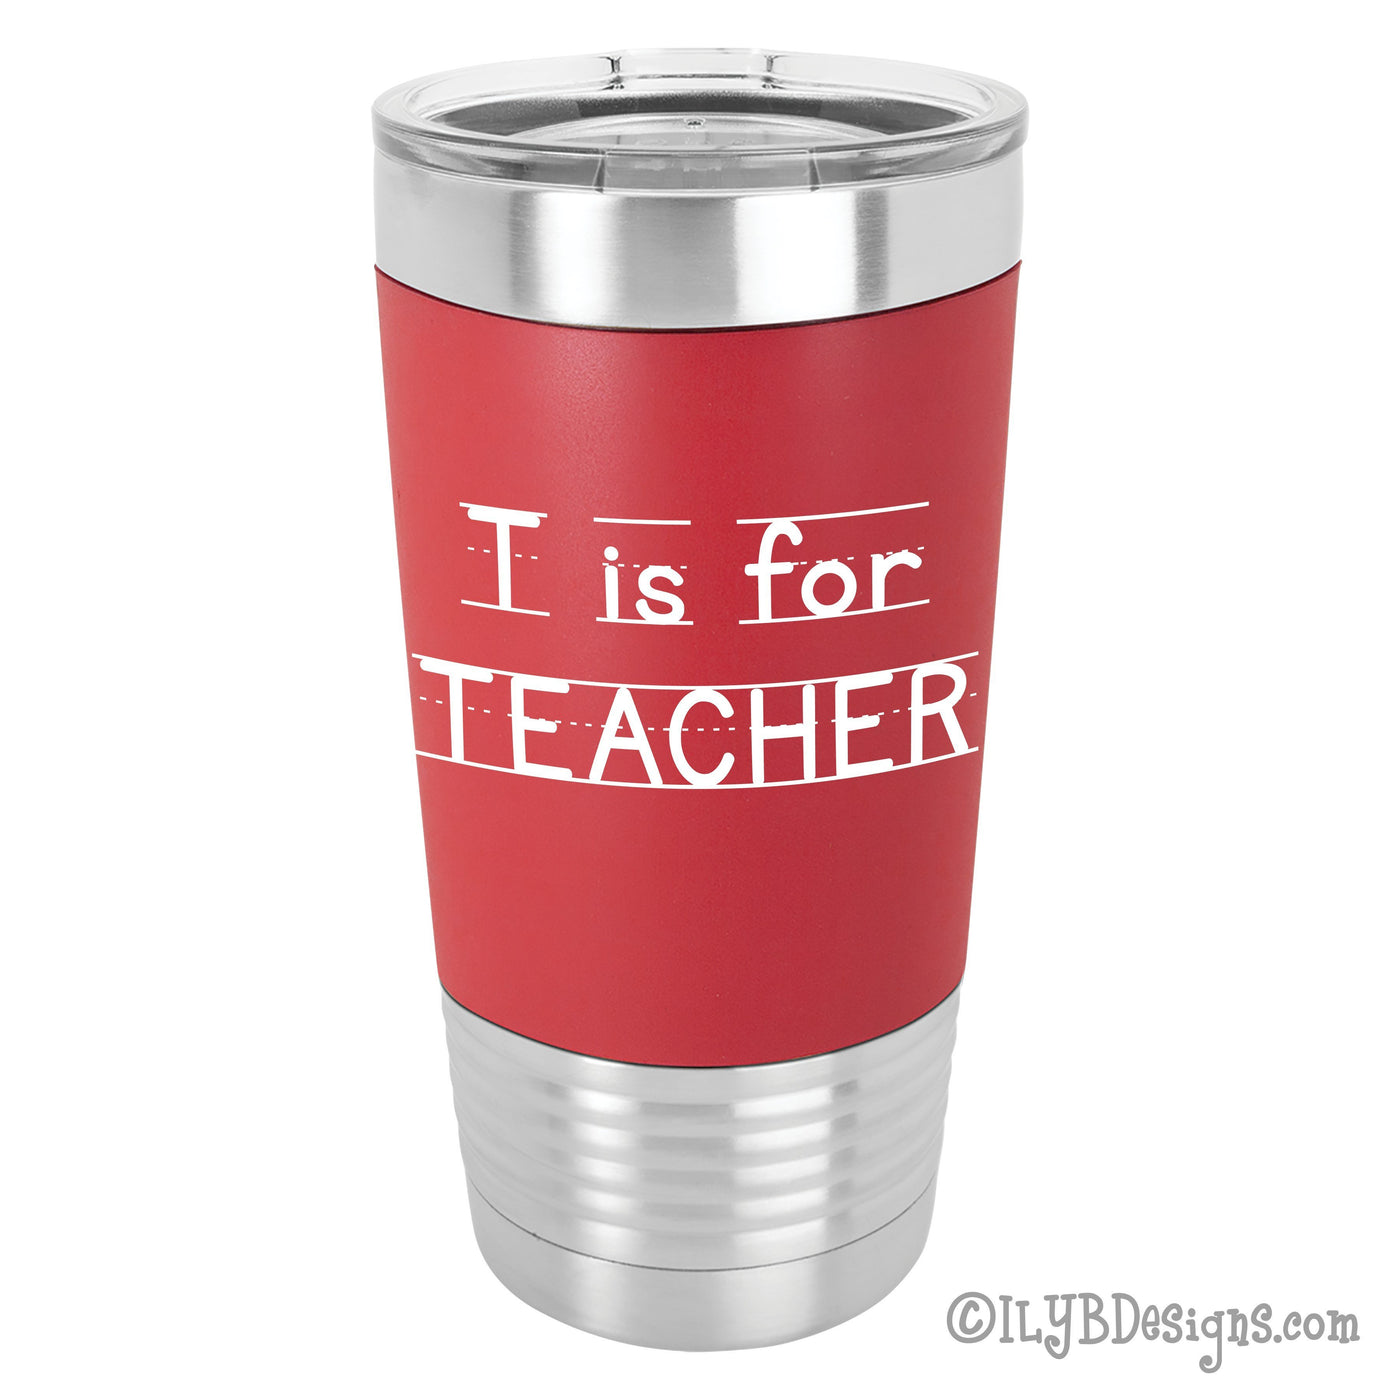 T is for Teacher Personalized Tumbler 20oz Polar Camel Stainless Steel Tumbler with red silicone sleeve. "T is for Teacher" is laser engraved in white in a font that looks like primary lined paper. 